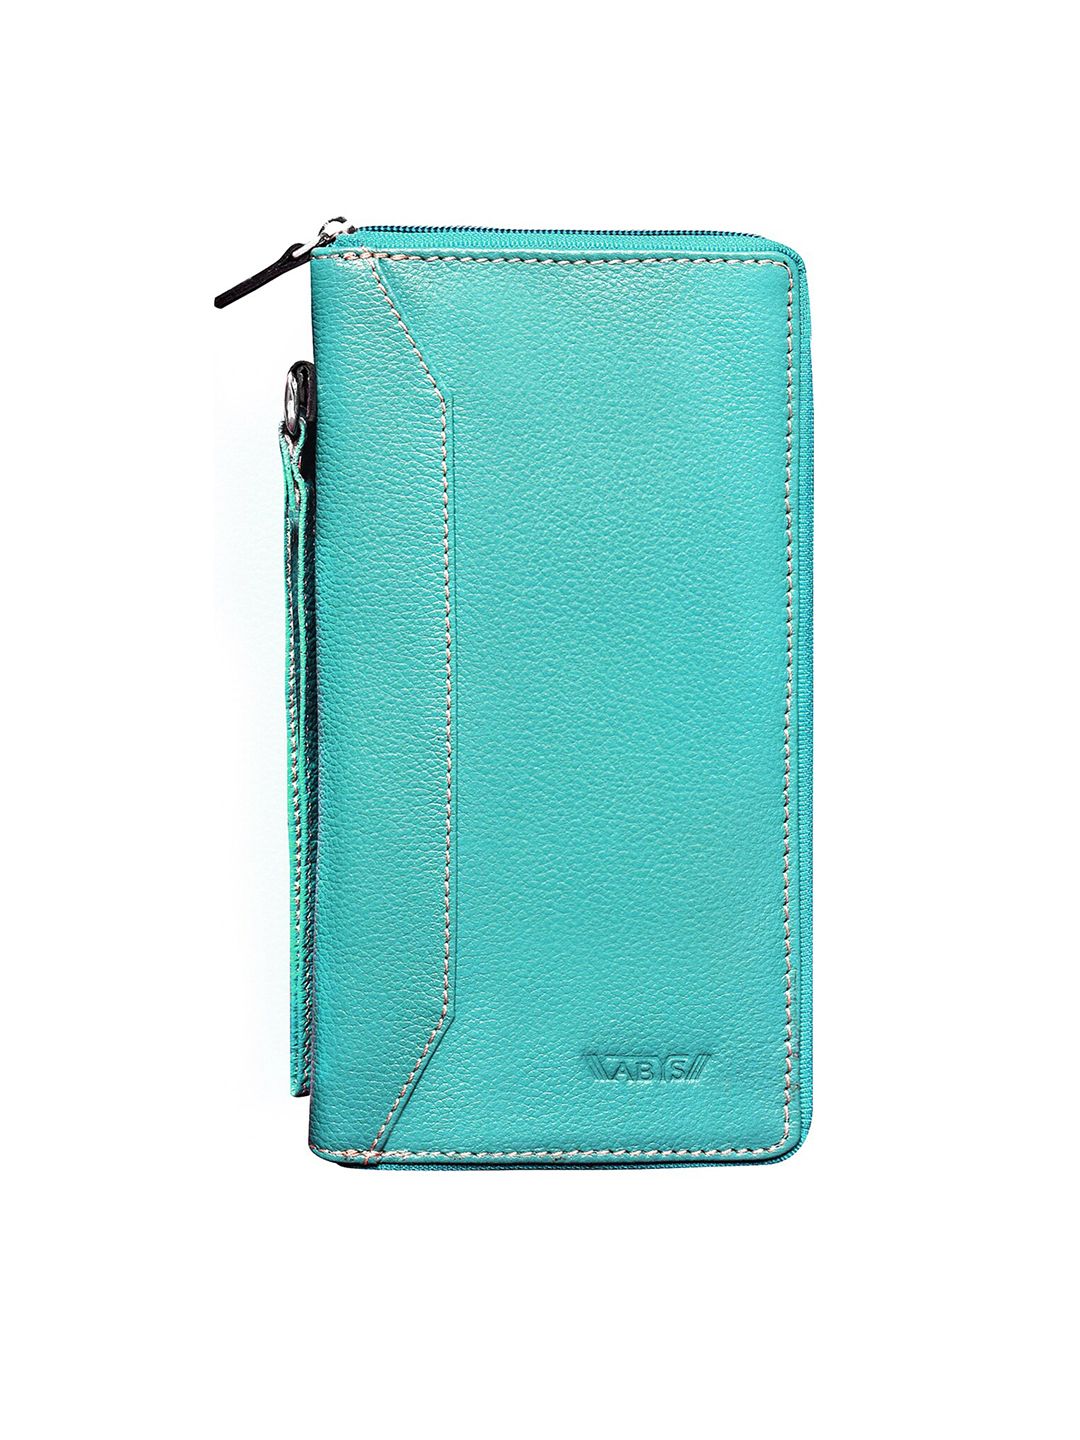 ABYS Unisex Teal Textured  Leather Passport Holder Price in India